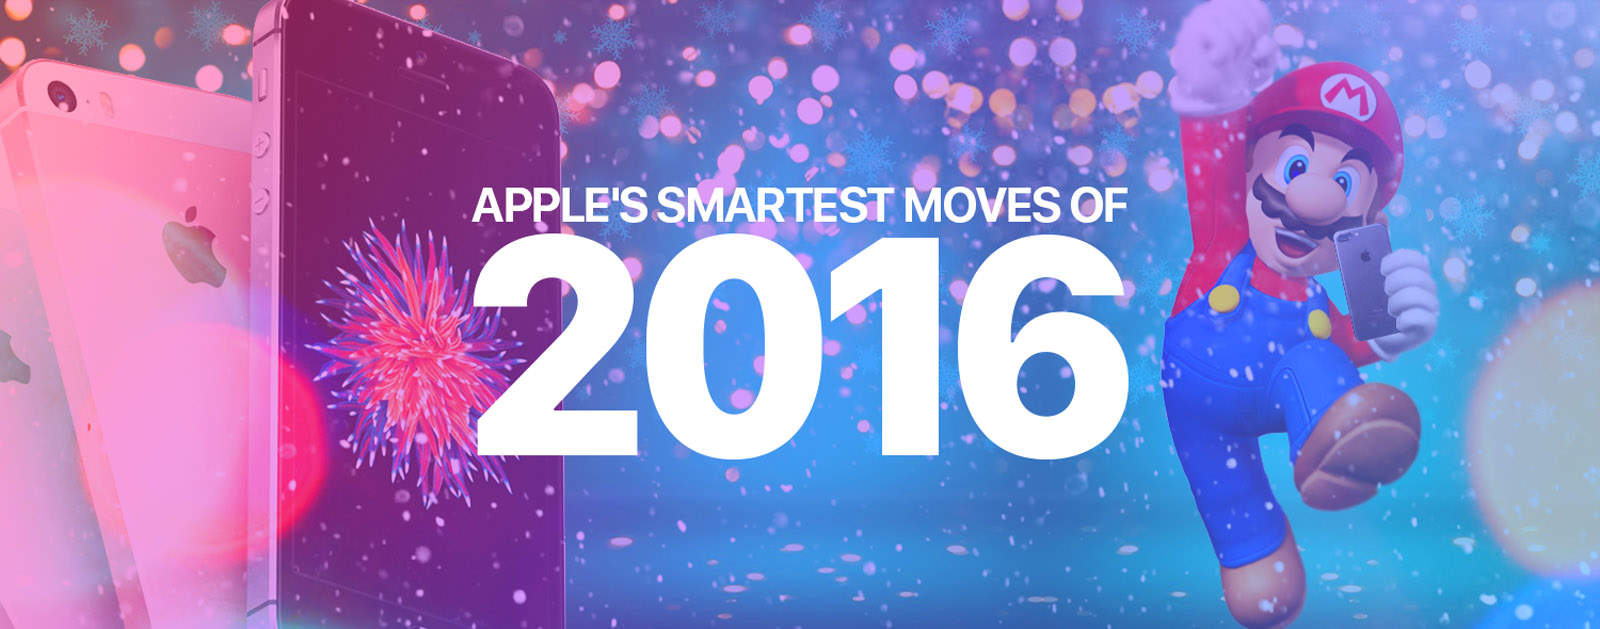 2016 wasn't all missed deadlines and mysterious battery problems for Apple.